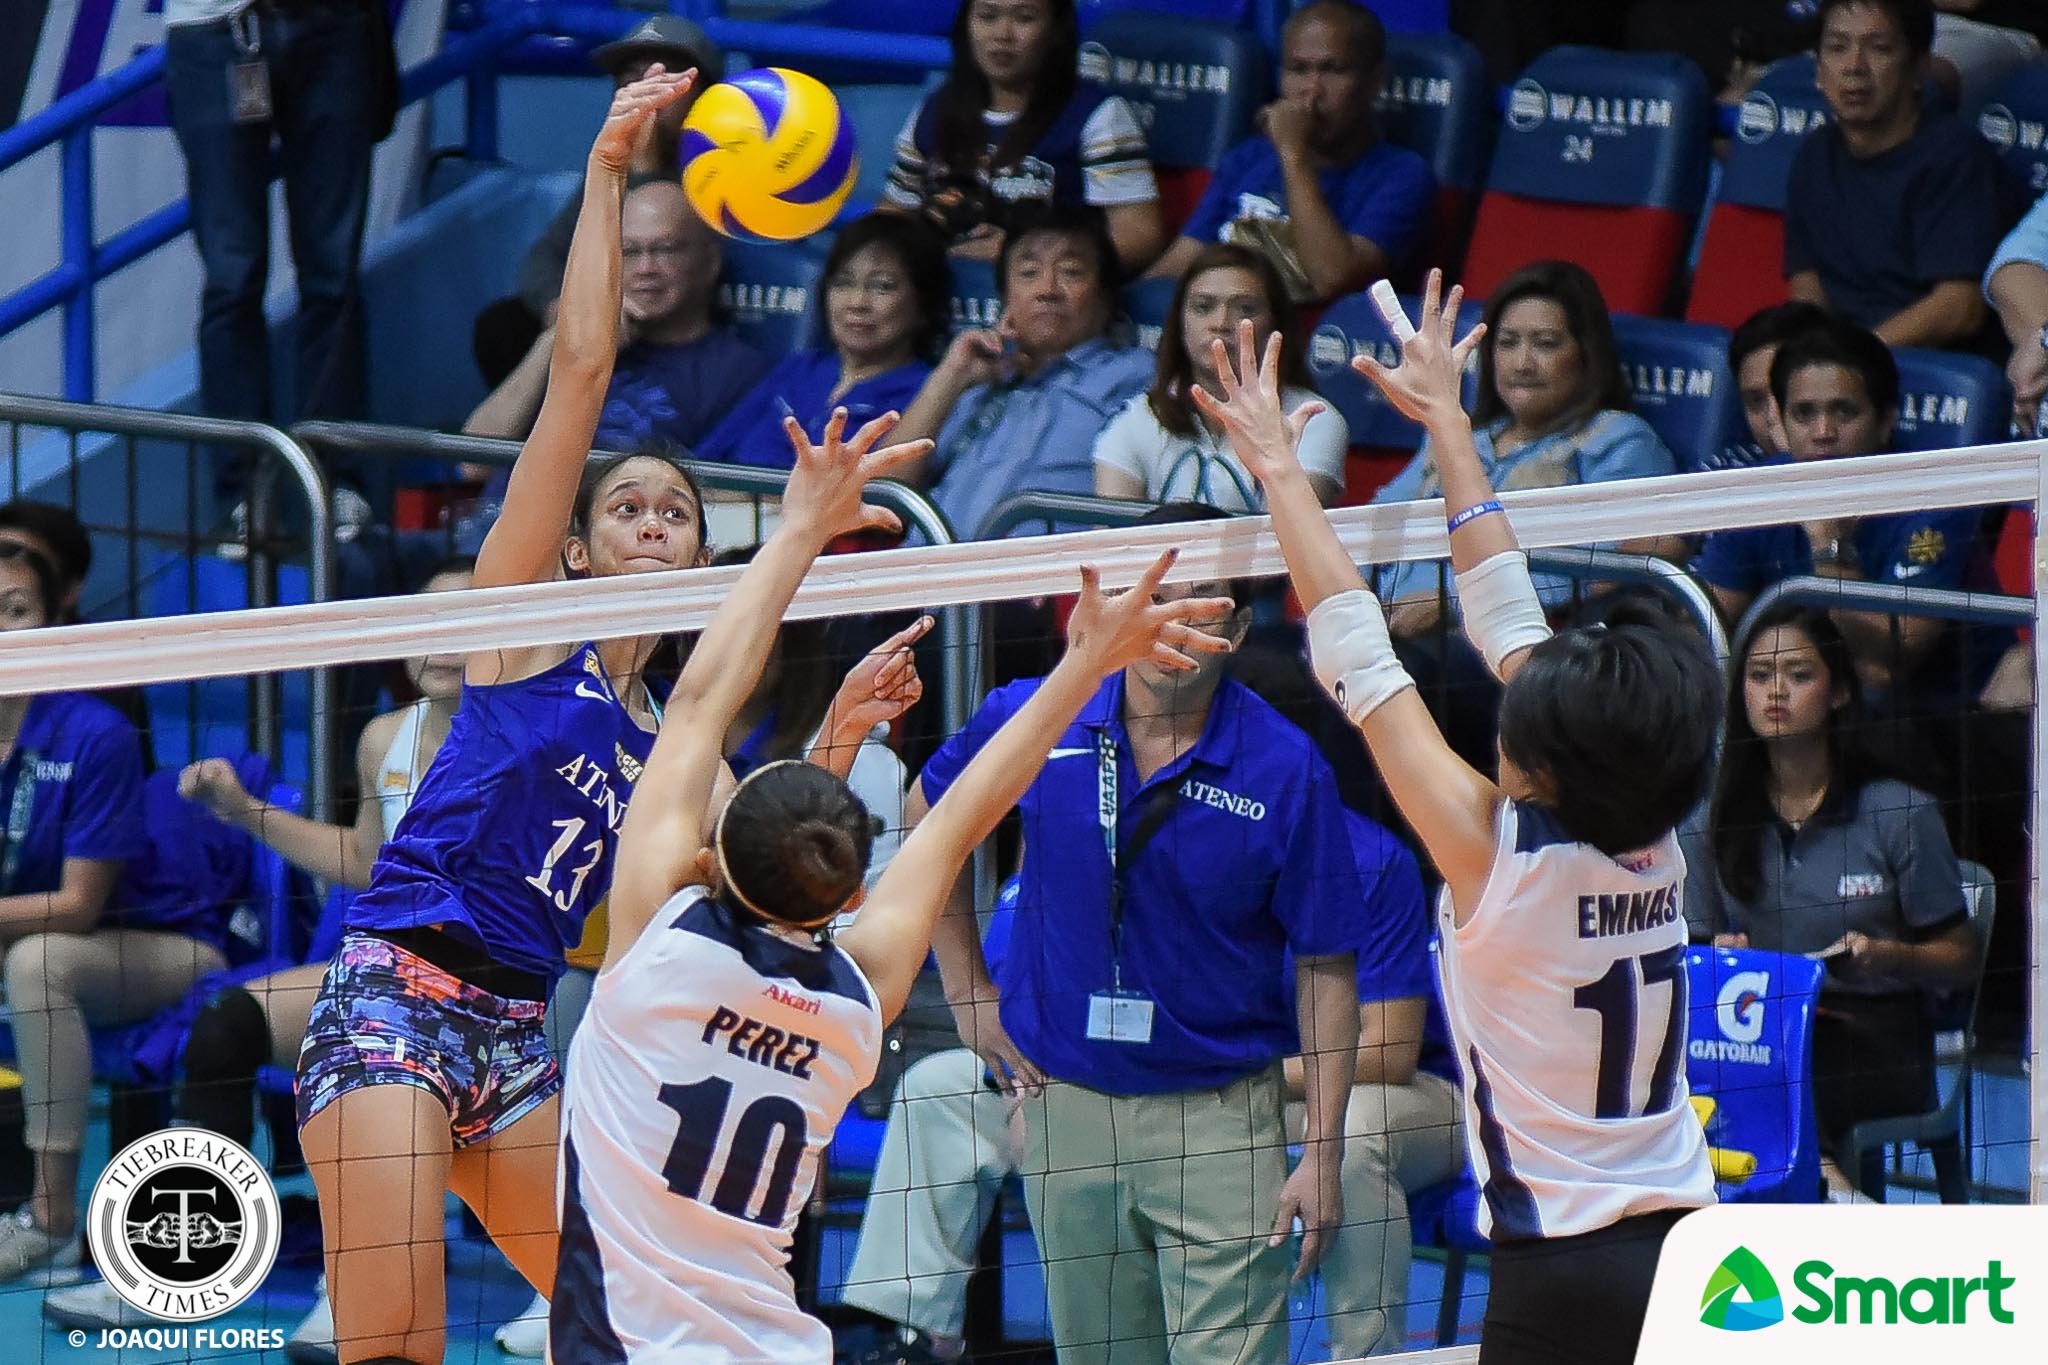 UAAP-80-Volleyball-ADU-vs.-ADMU-Maraguinot-4100 'C+' Lady Eagles look to improve heading into last stretch of first round ADMU News UAAP Volleyball  - philippine sports news